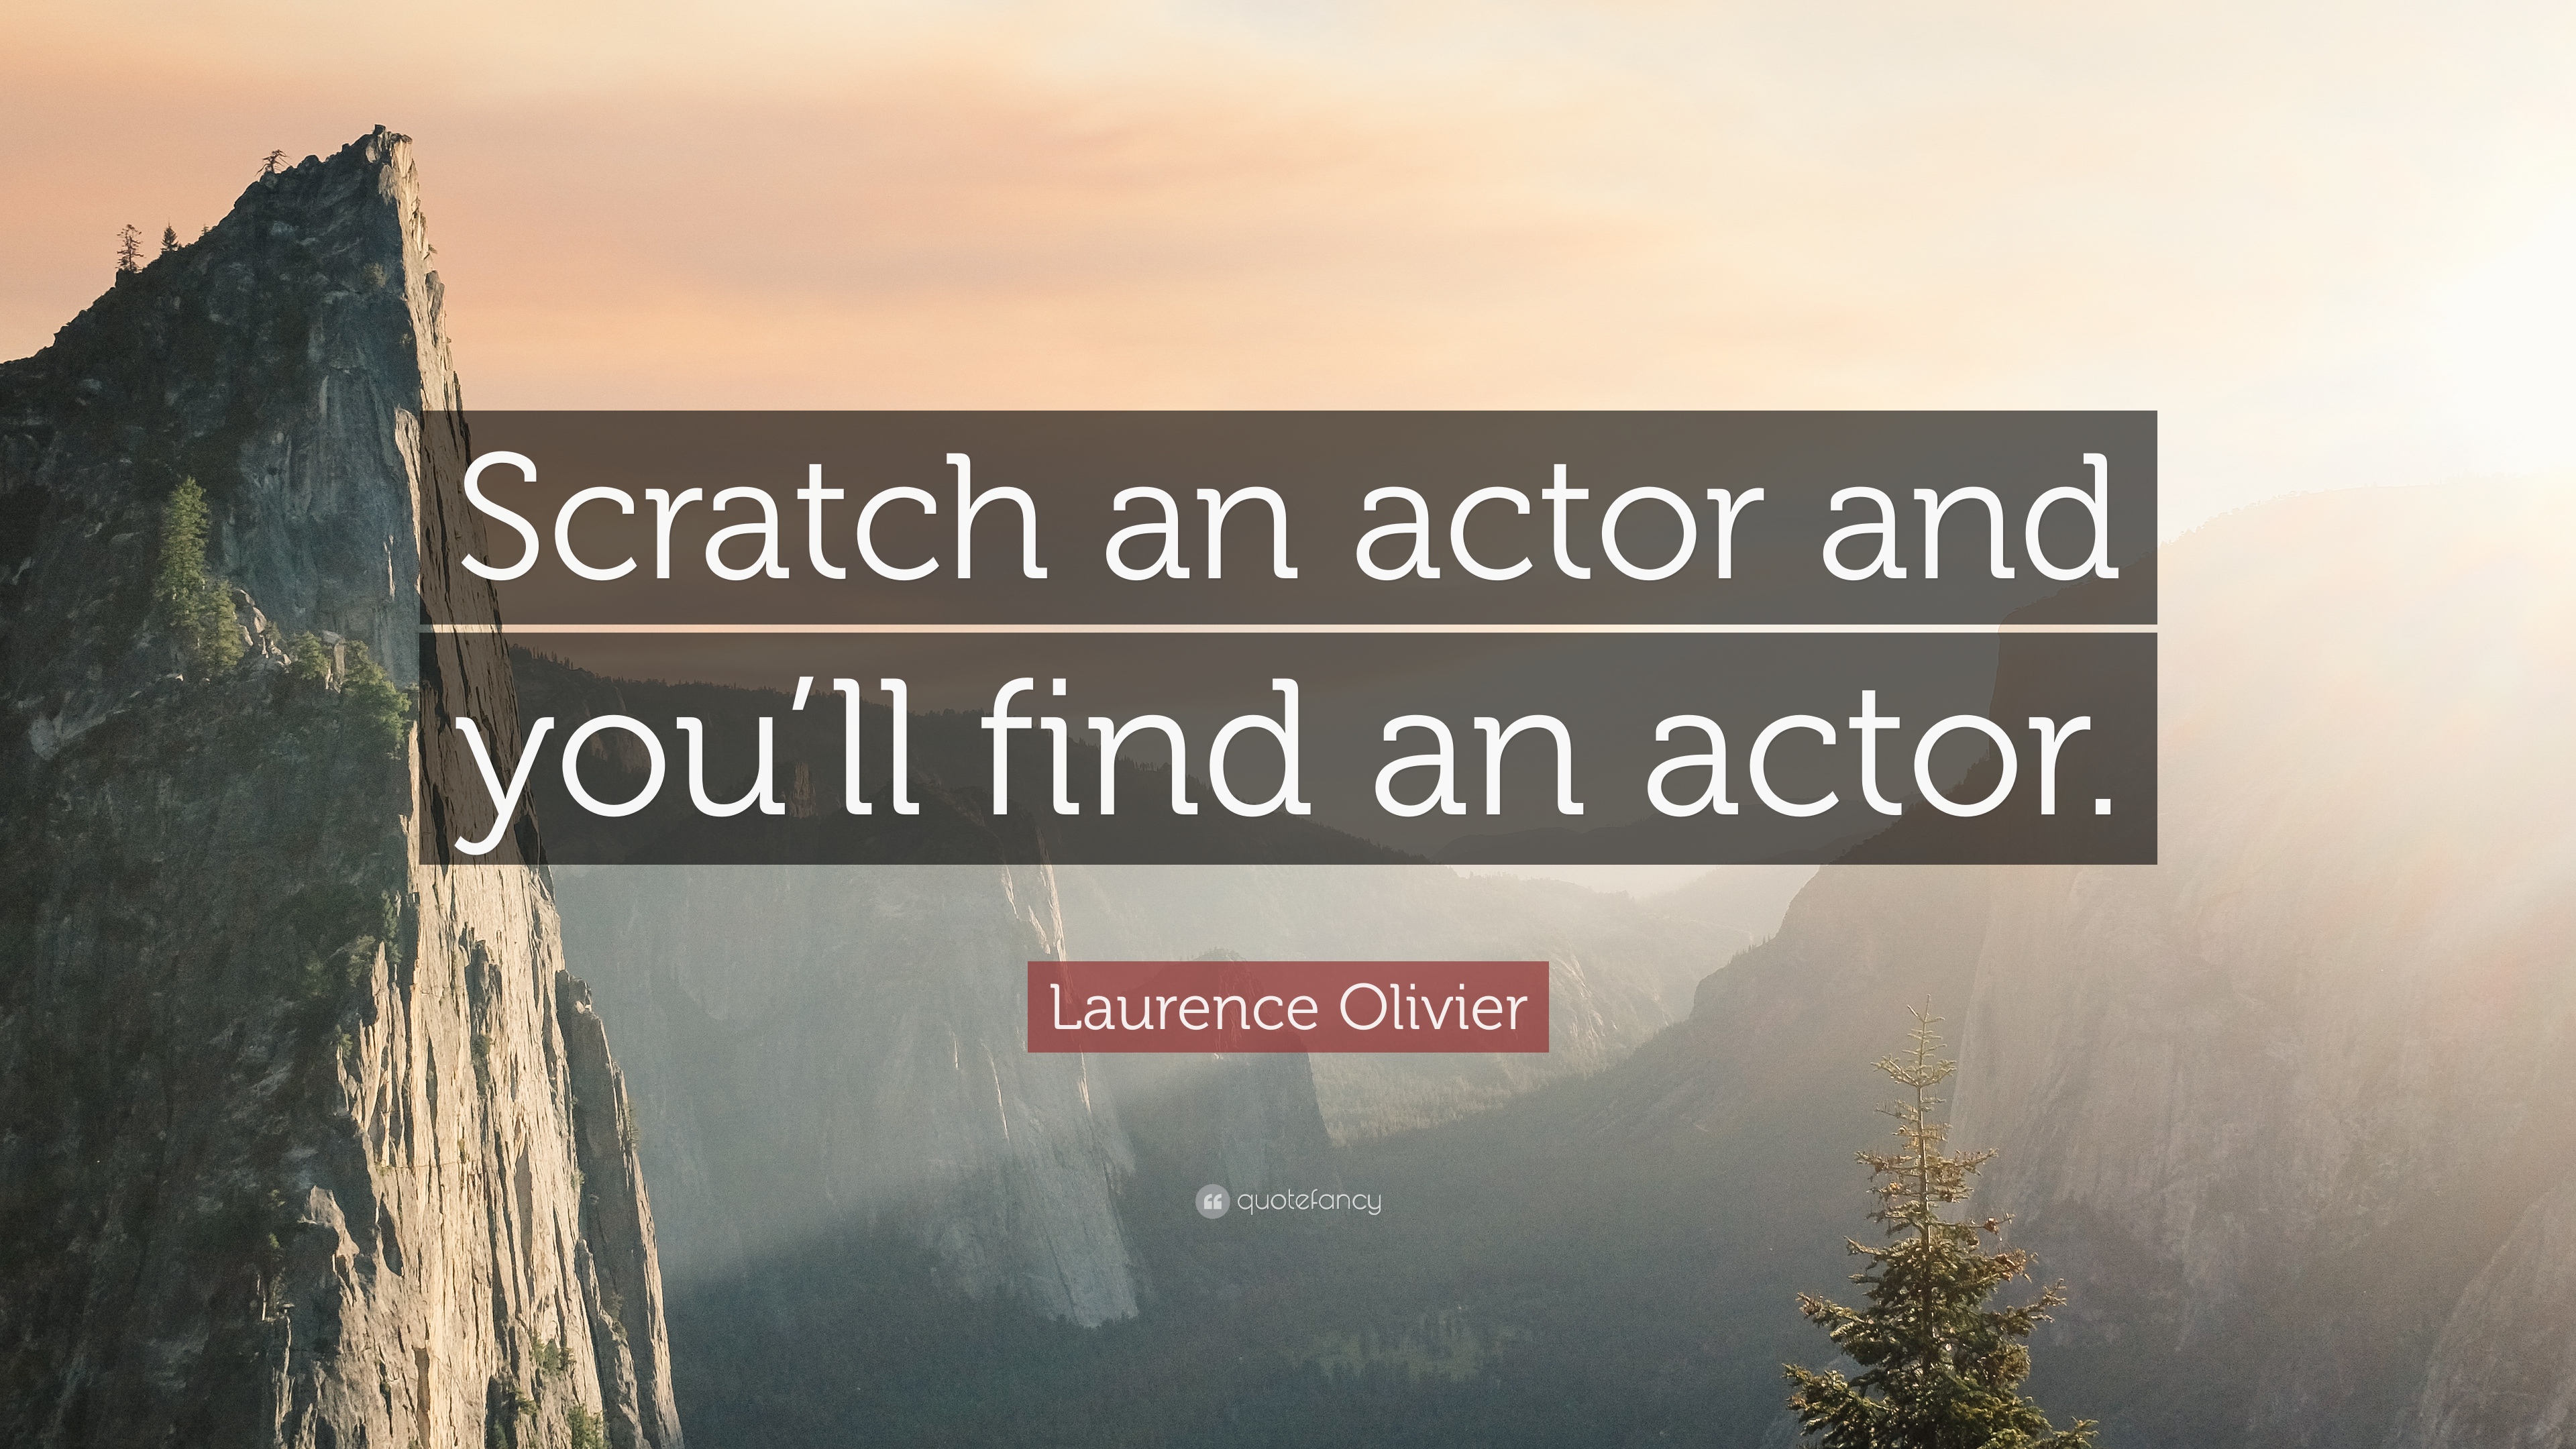 Laurence Olivier Quote: “Scratch an actor and you'll find an actor